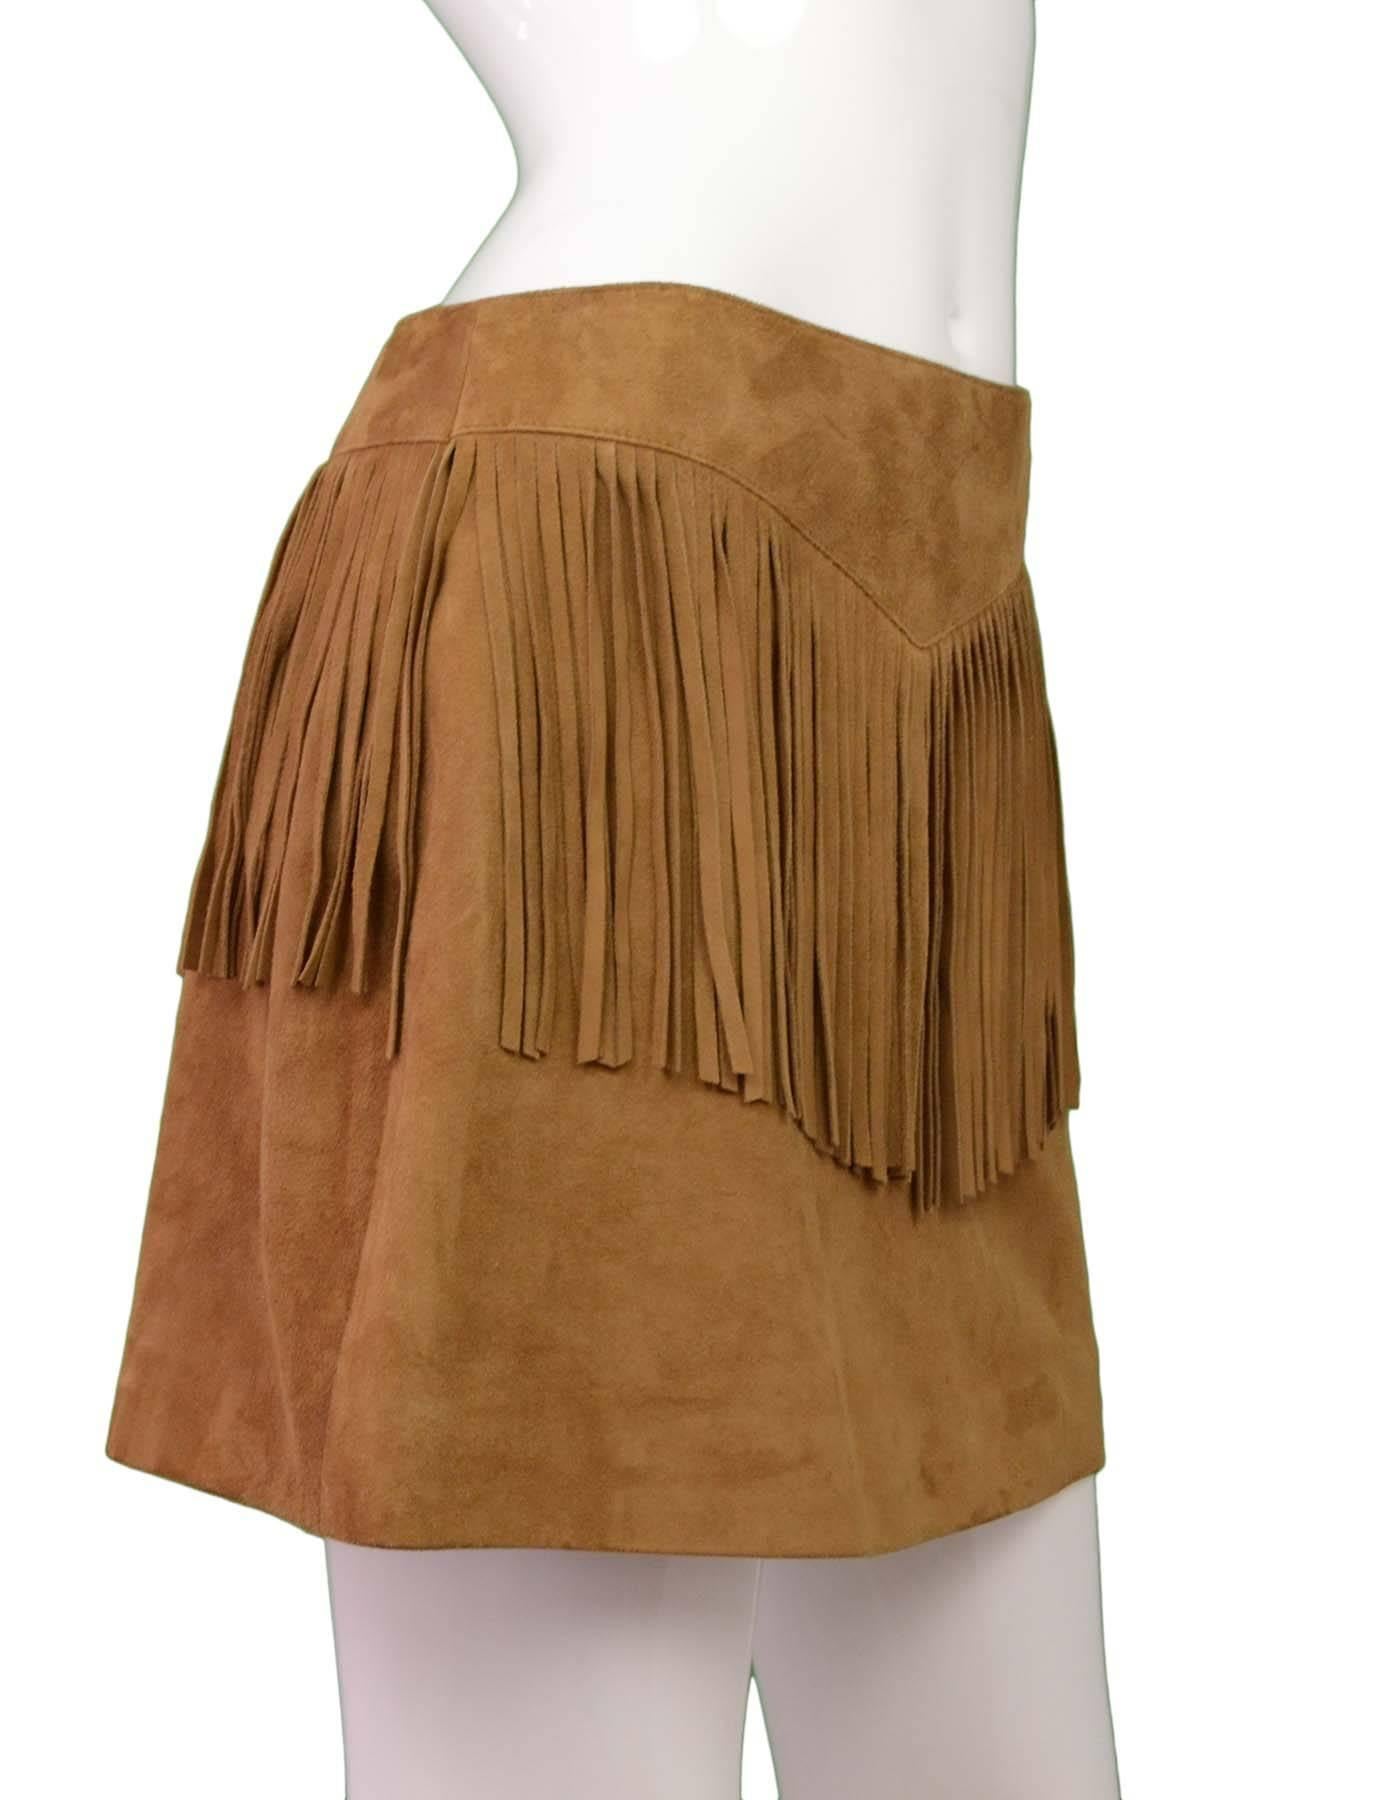 Saint Laurent Tan Suede Fringe Mini Skirt 
Made In: Italy
Color: Tan
Composition: 100% goat skin
Lining: Black, 100% silk
Closure/Opening: Waist zipper
Exterior Pockets: None
Interior Pockets: None
Retail Price: $2,350 + tax
Overall